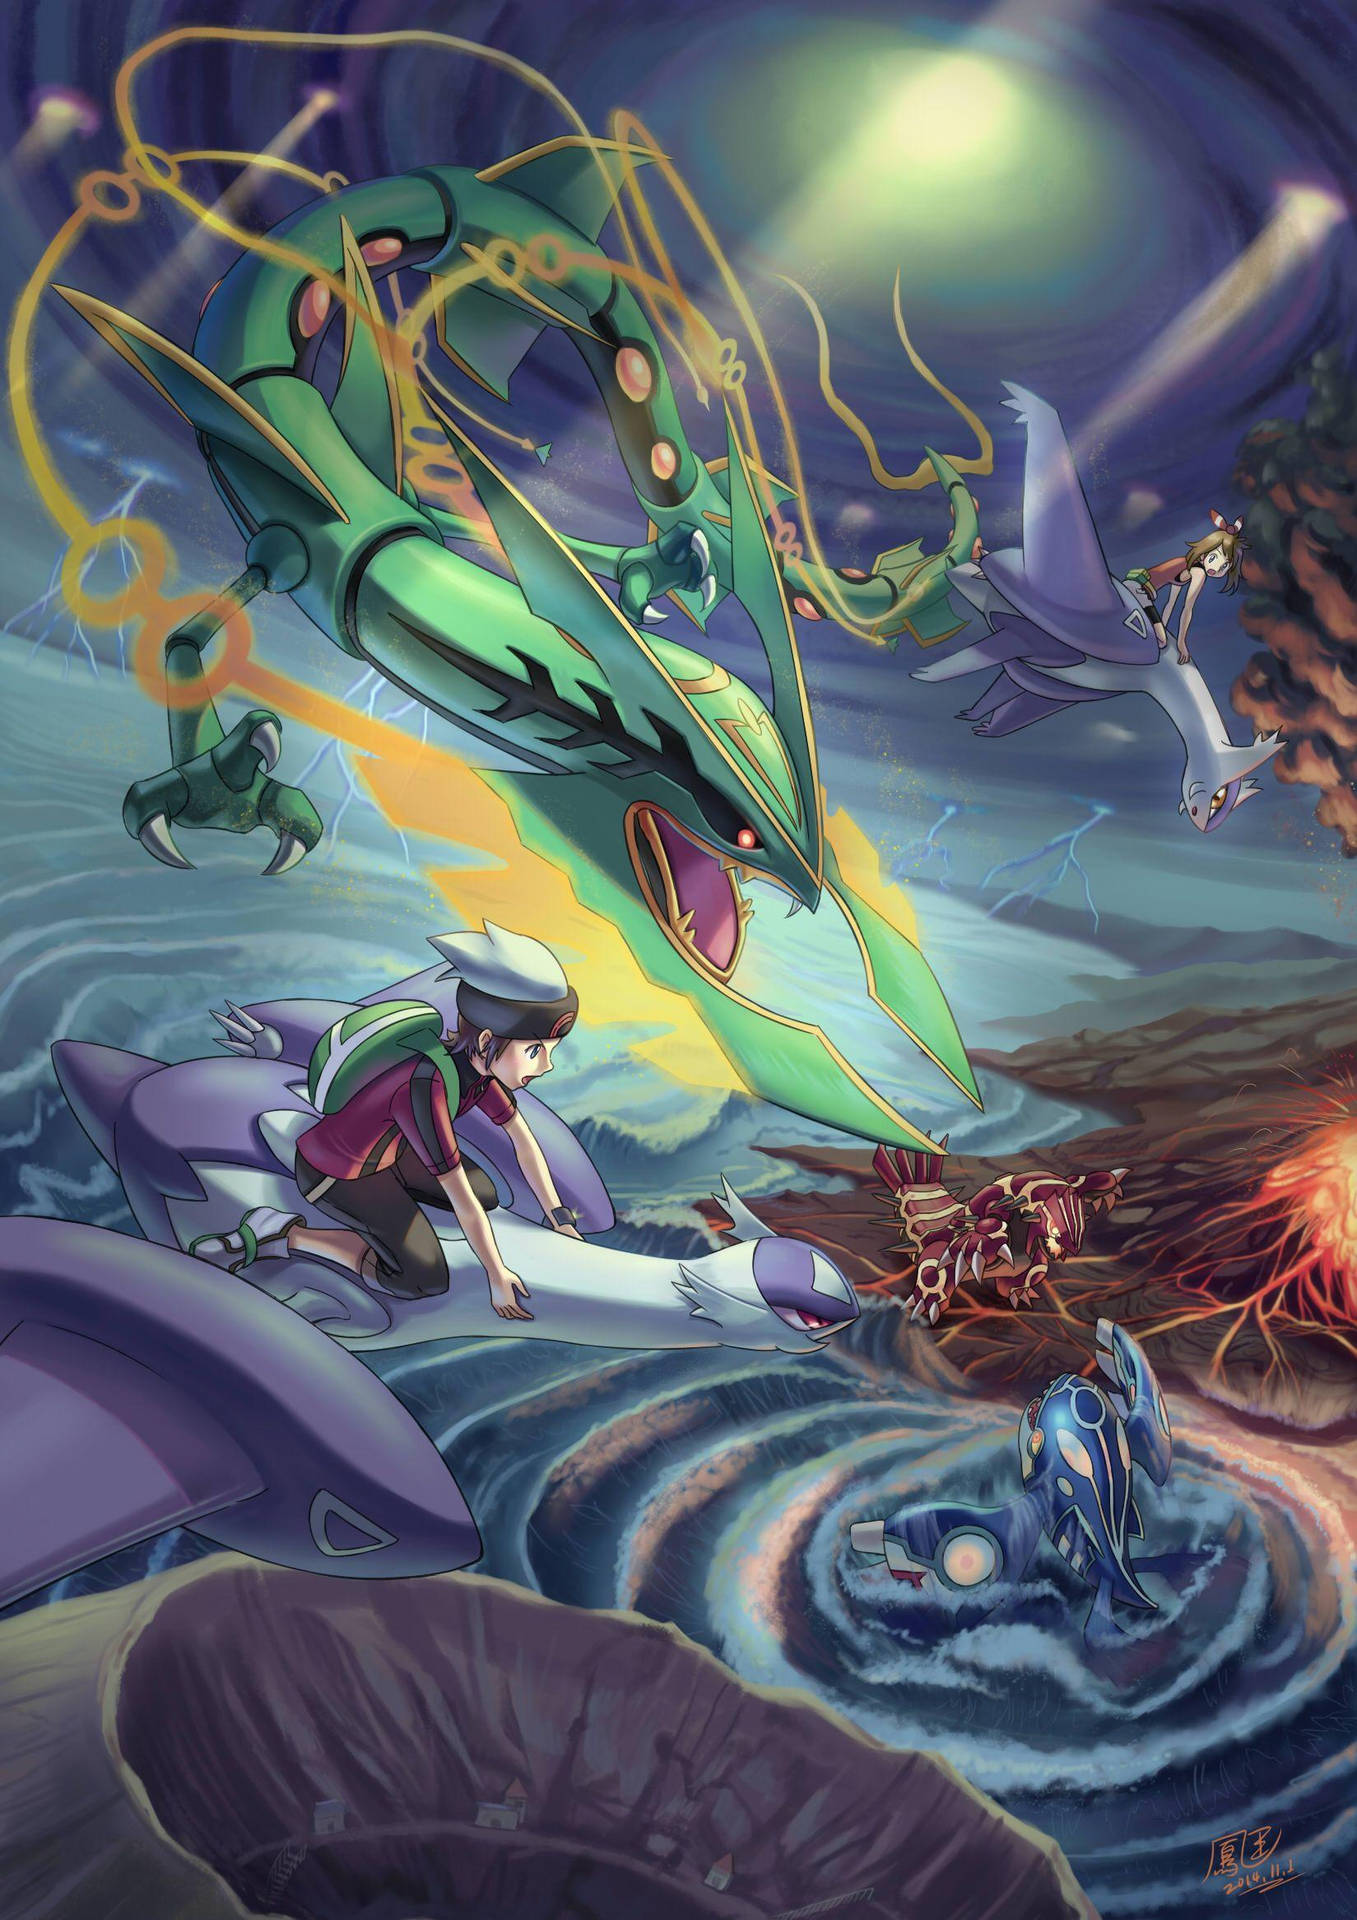 Free Rayquaza Wallpaper Downloads, [100+] Rayquaza Wallpapers for FREE |  